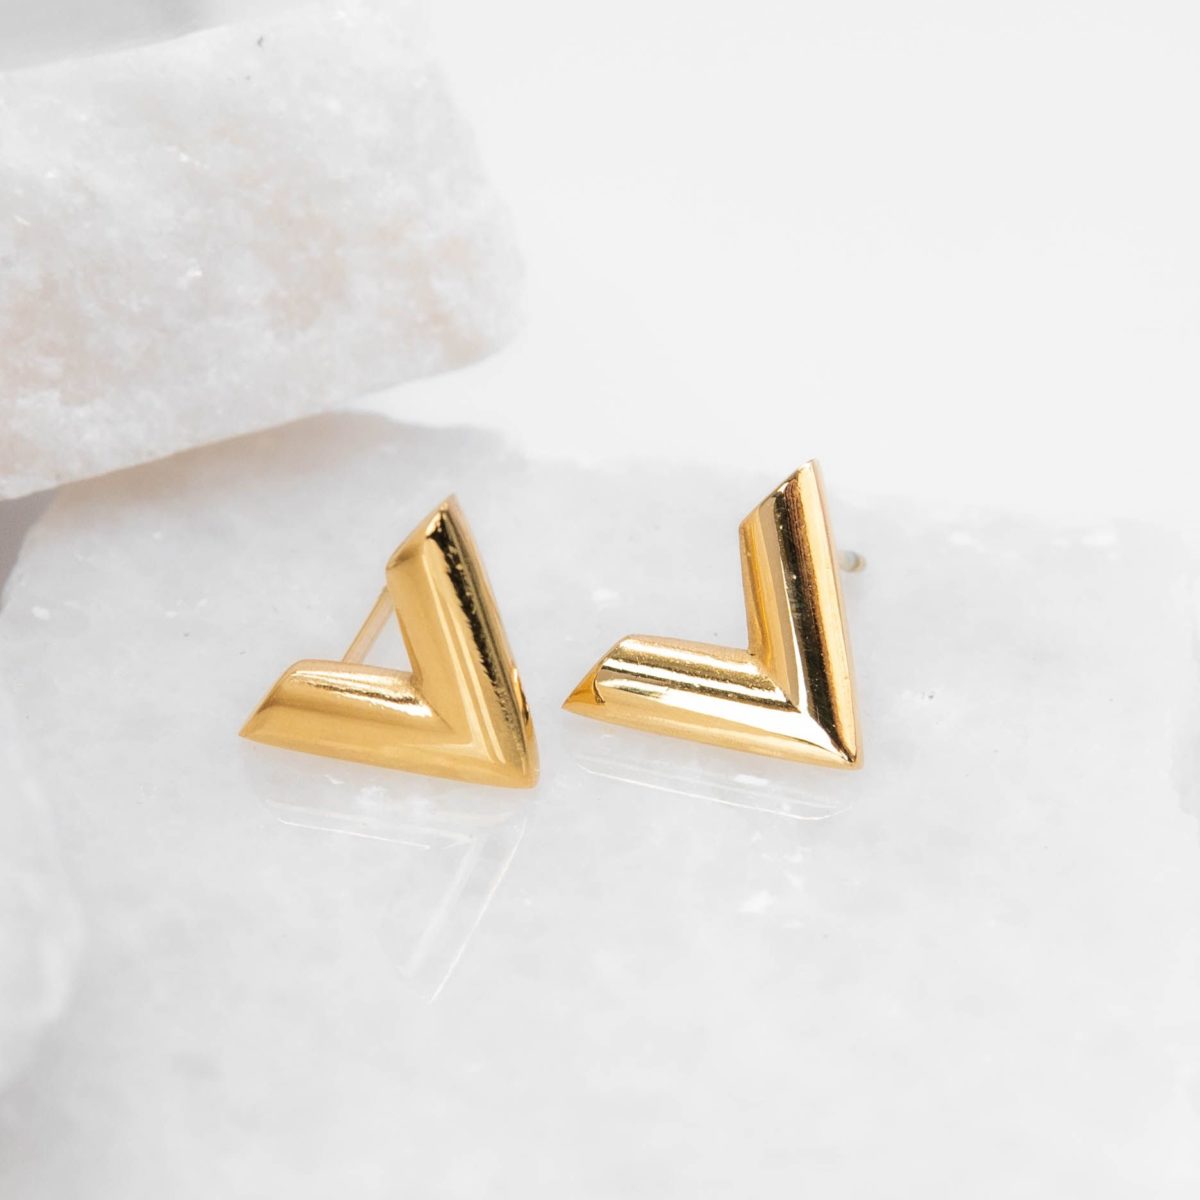 https://m.clubbella.co/product/vermont-gold-earrings/ Vermont earrings Gold (3)